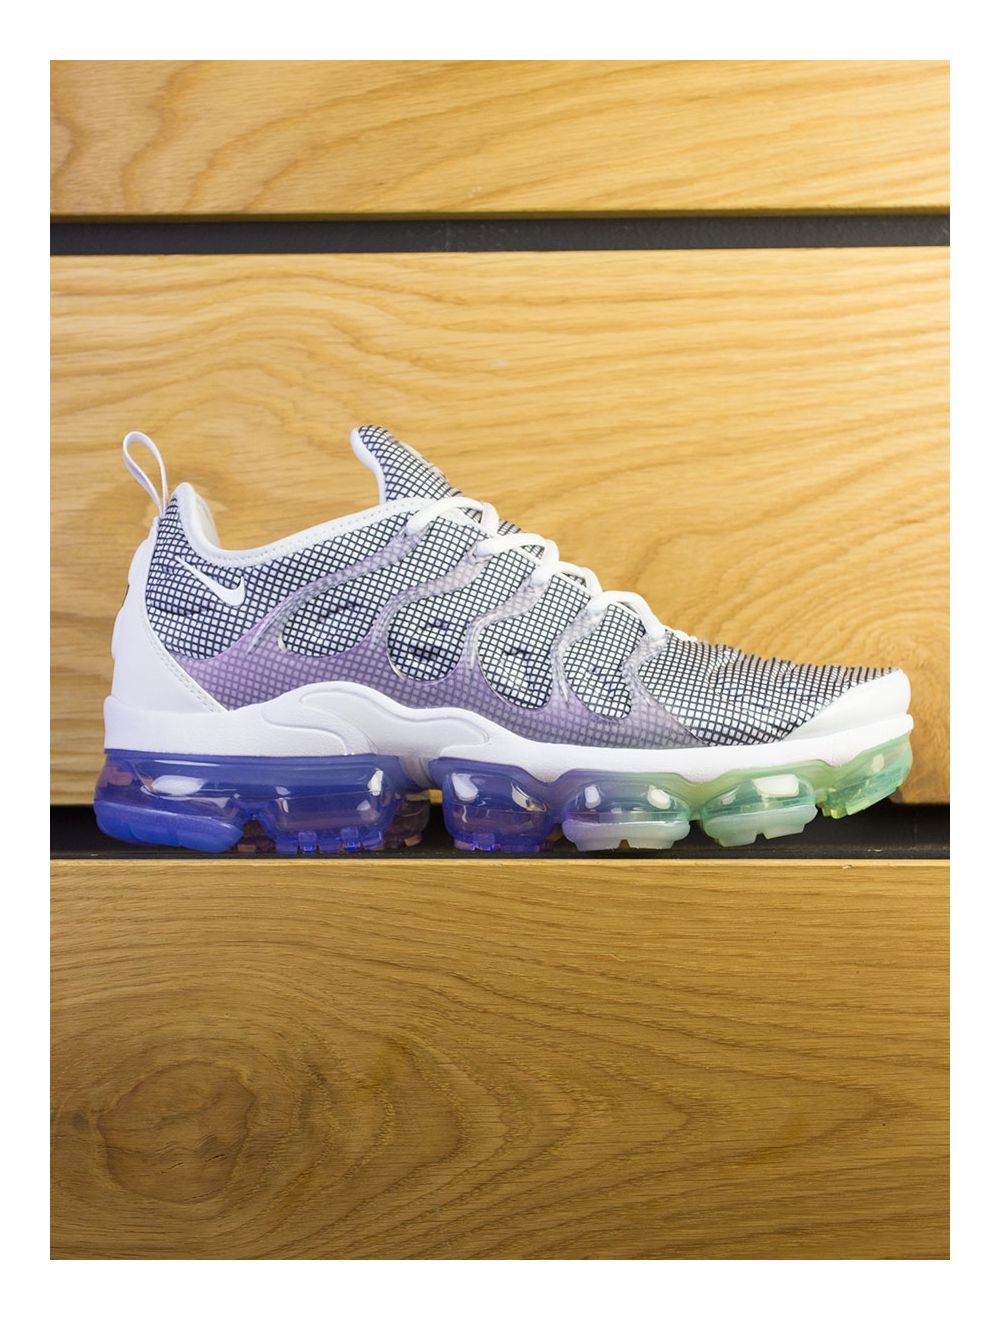 FashionReps Outfits for the nike vapormax plus tropical sunset